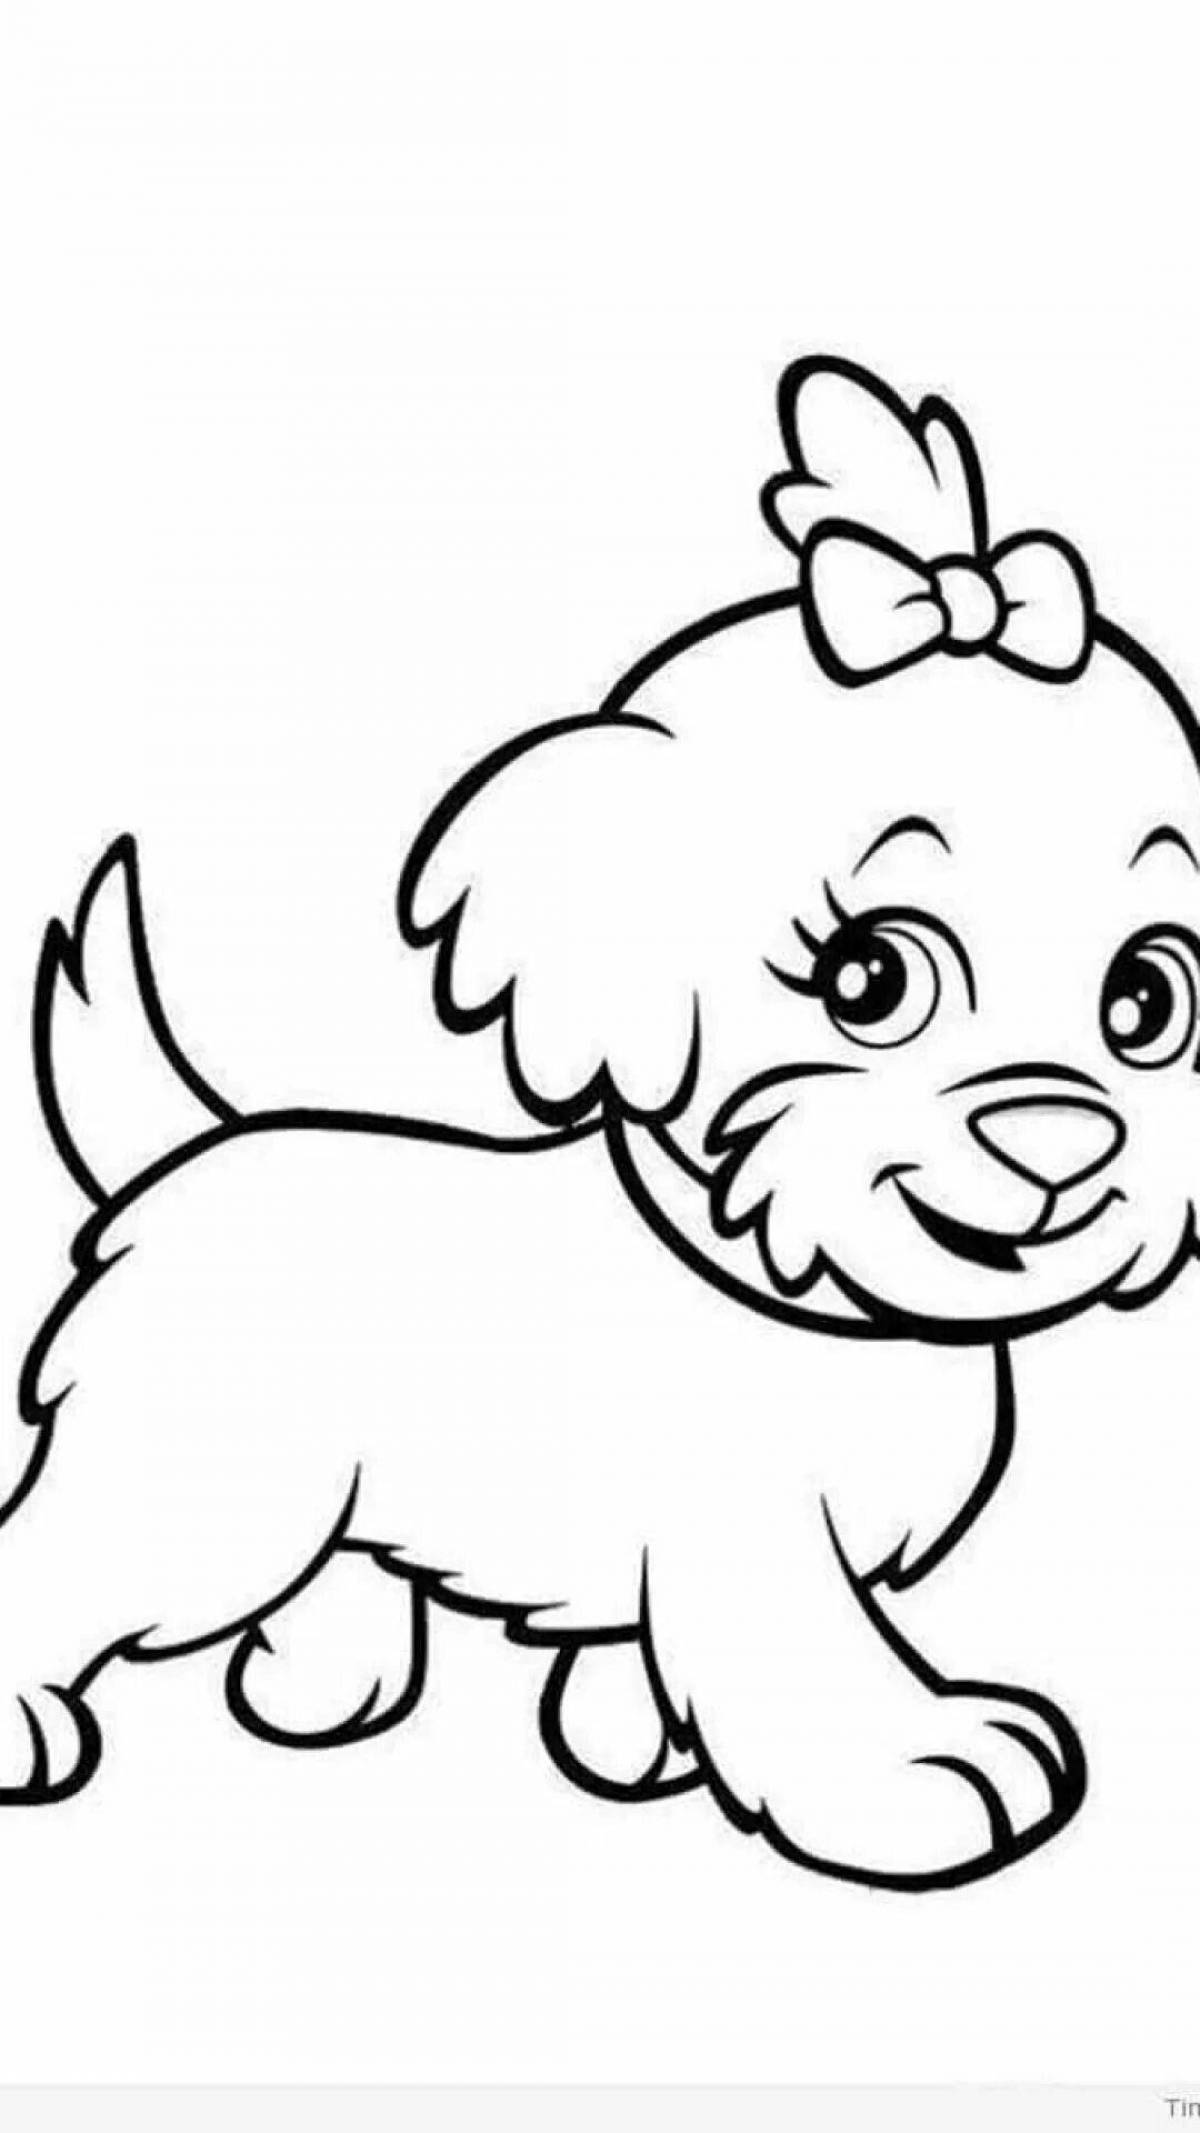 Coloring page fluffy dog